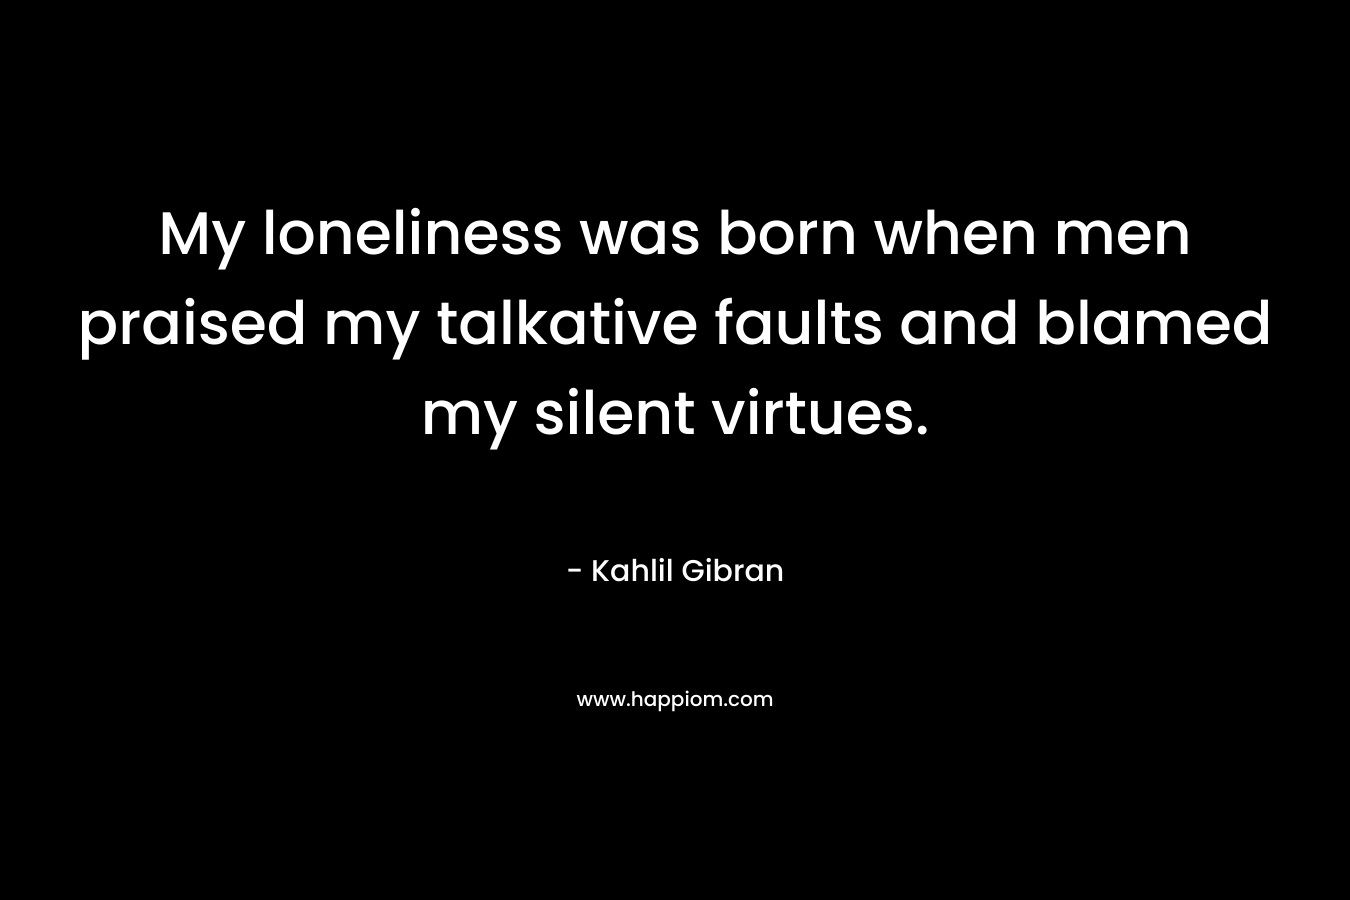 My loneliness was born when men praised my talkative faults and blamed my silent virtues. – Kahlil Gibran